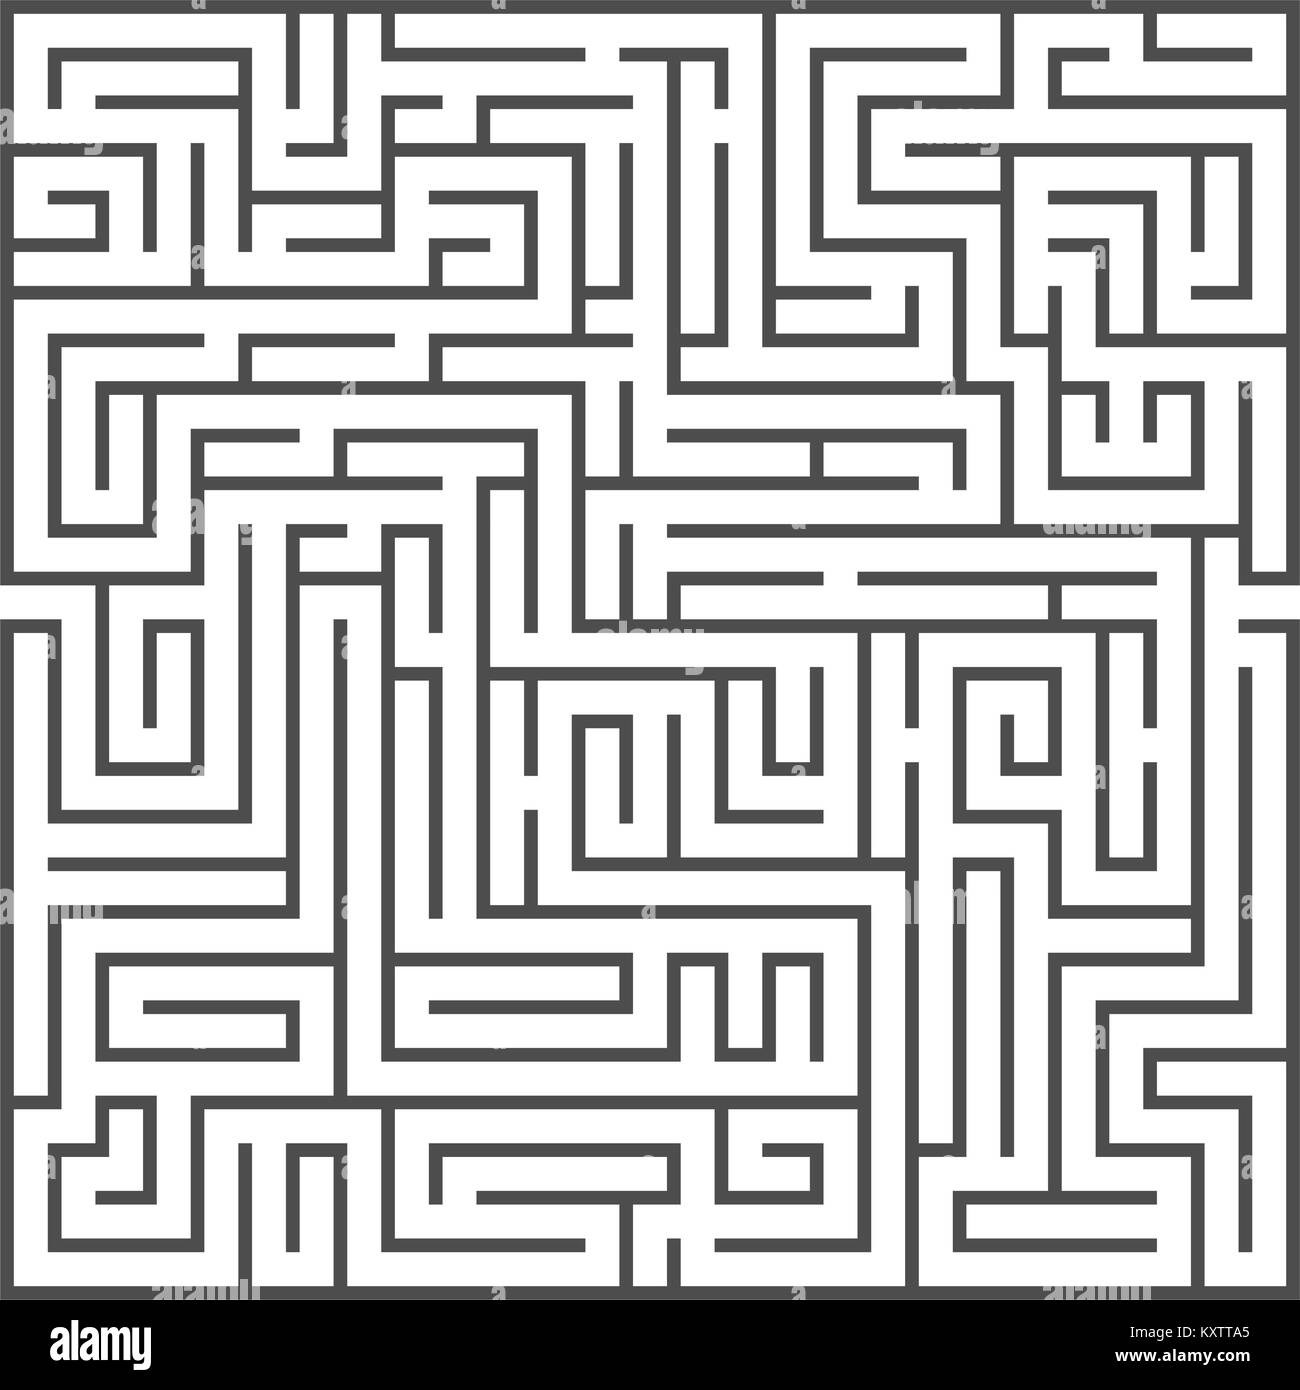 Square maze isolated on white background. Medium complexity Stock Vector